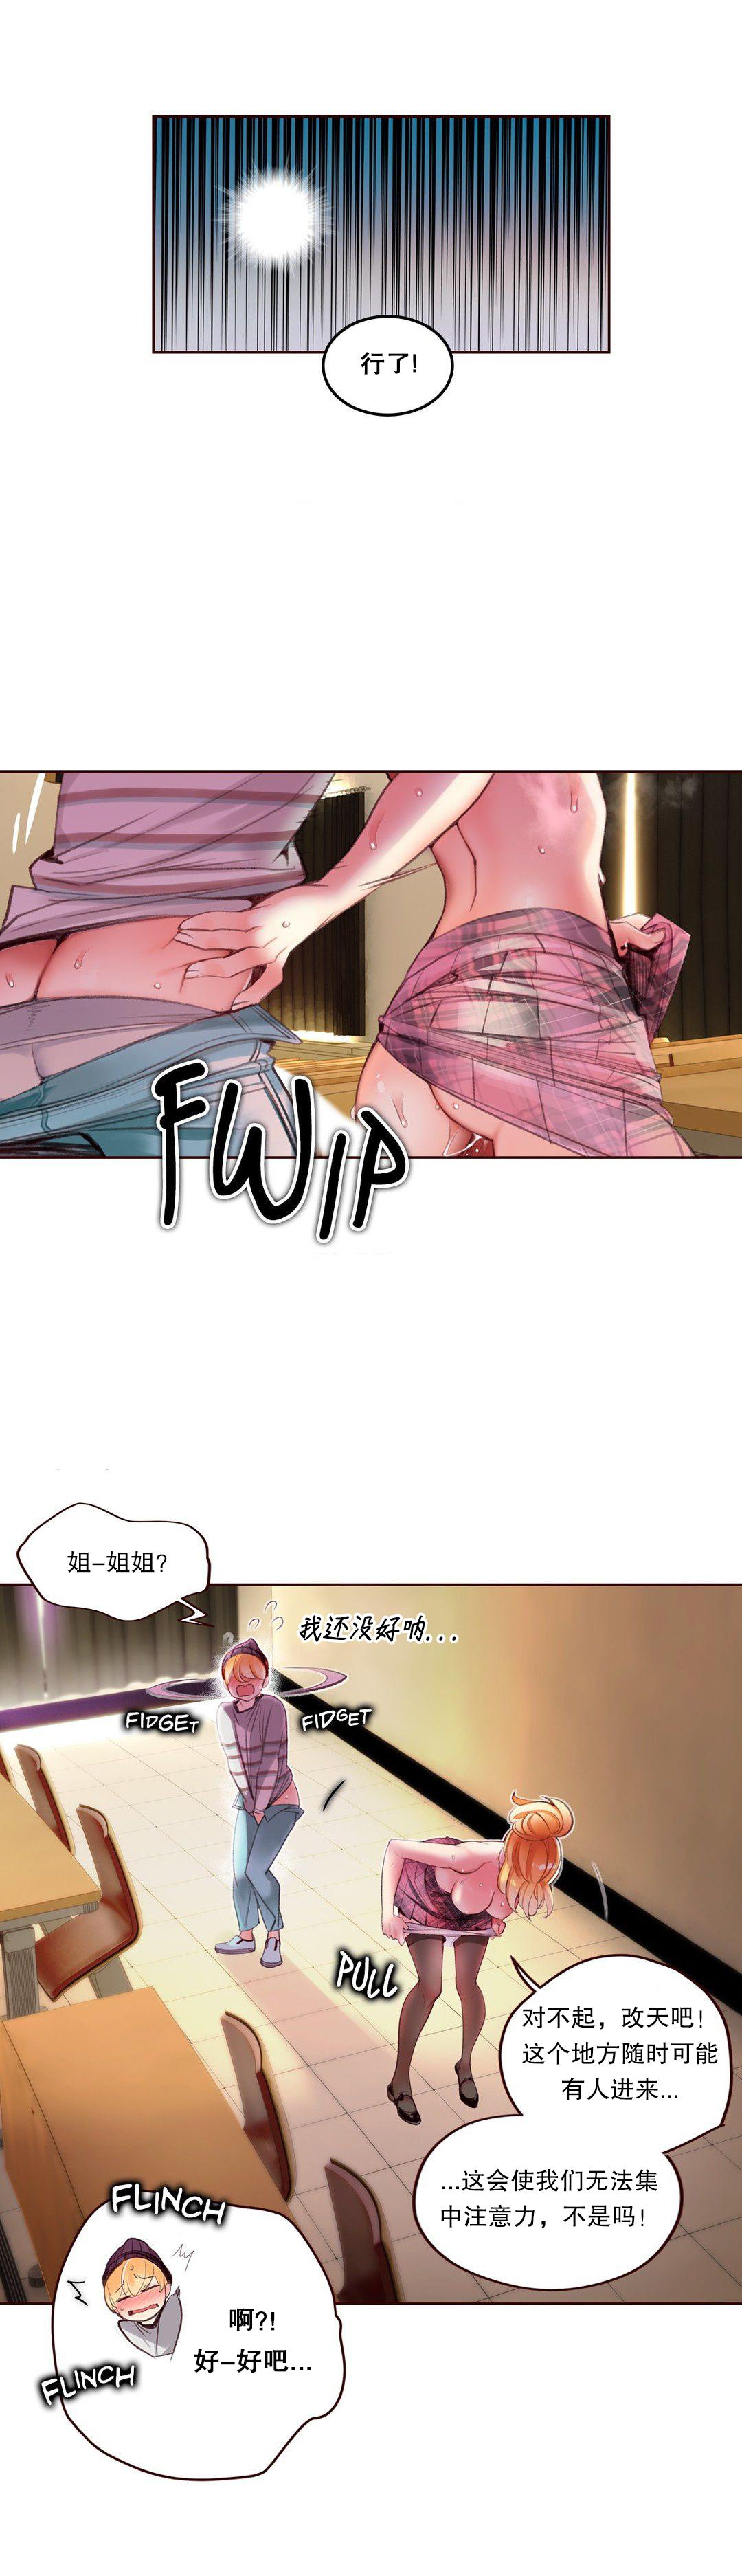 [Juder] Lilith`s Cord (第二季) Ch.61-62 [Chinese] [aaatwist个人汉化] [Ongoing] 51